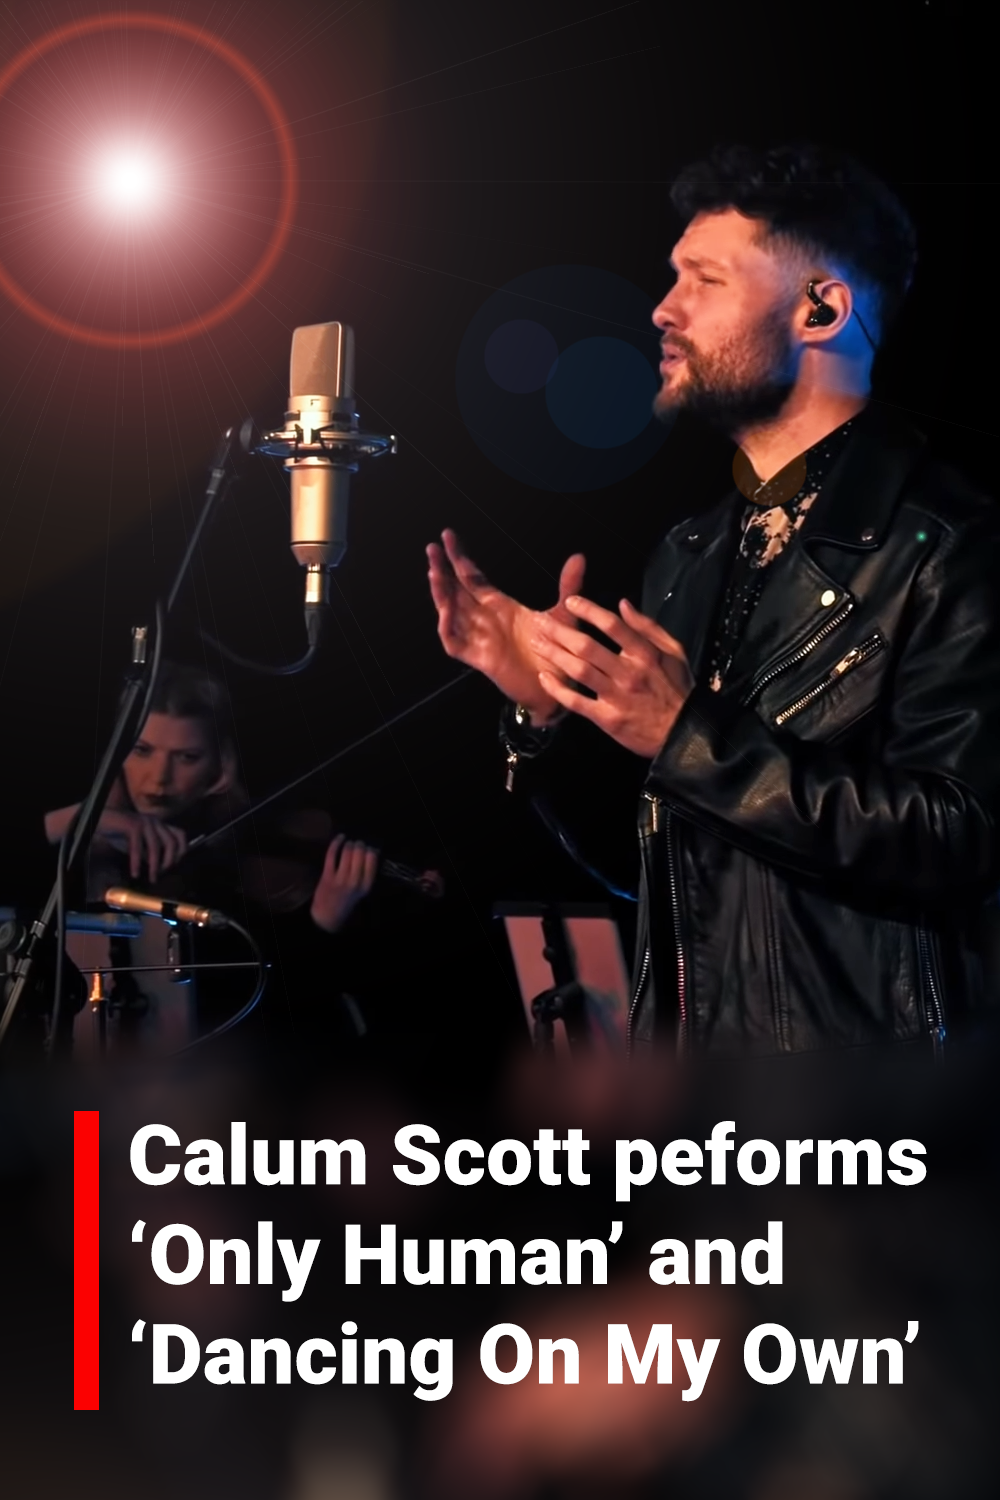 Calum Scott anniversary performance of ‘Only Human’ & ‘Dancing On My Own’